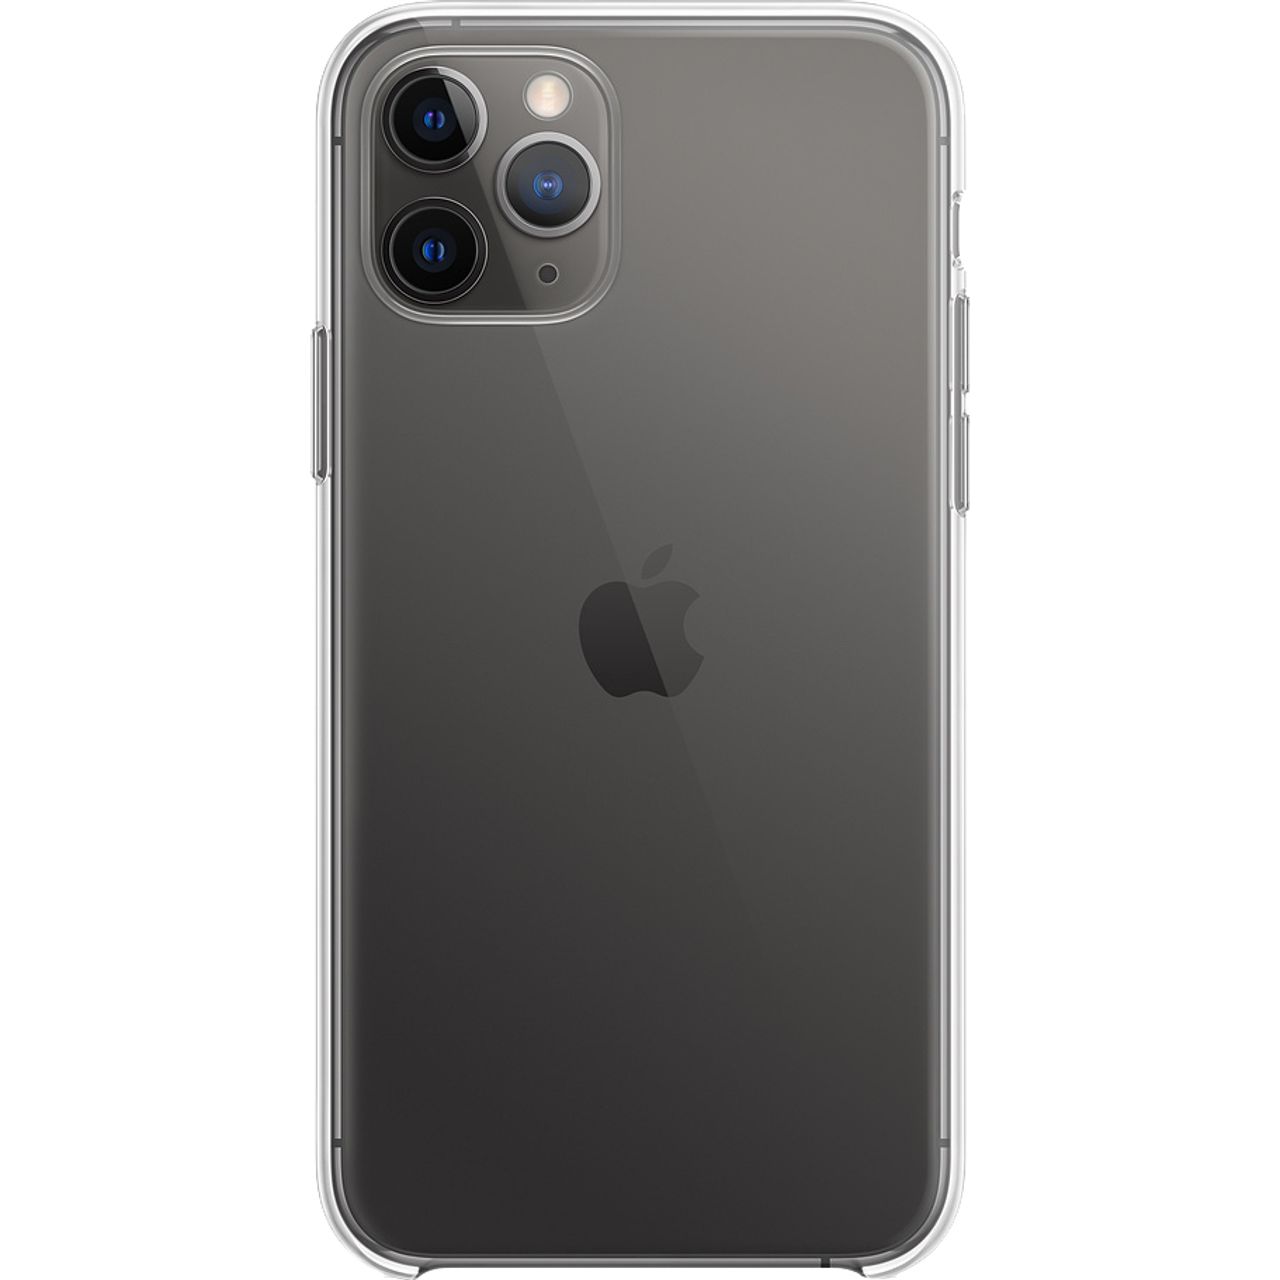 Apple iPhone 11 Pro Clear Case for iPhone 11 Pro Review